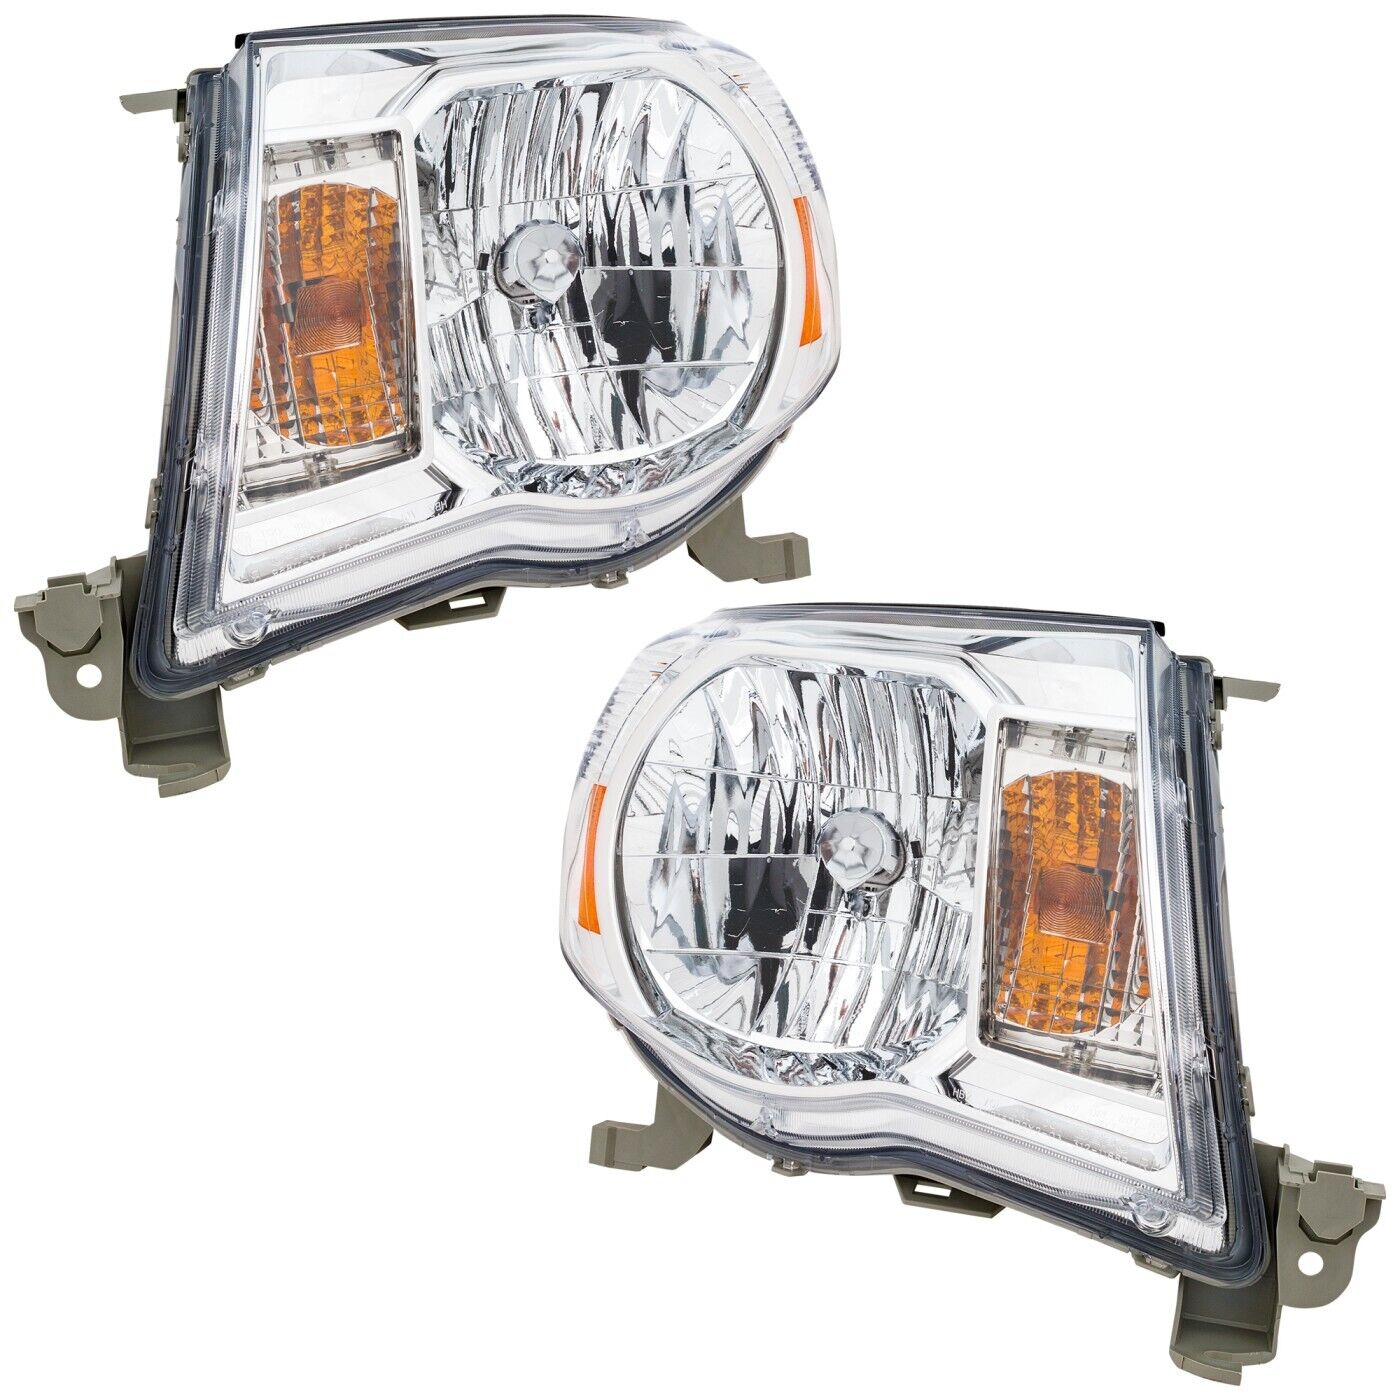 Headlight Set For 2005-2011 Toyota Tacoma Left and Right Halogen With Bulb 2Pc